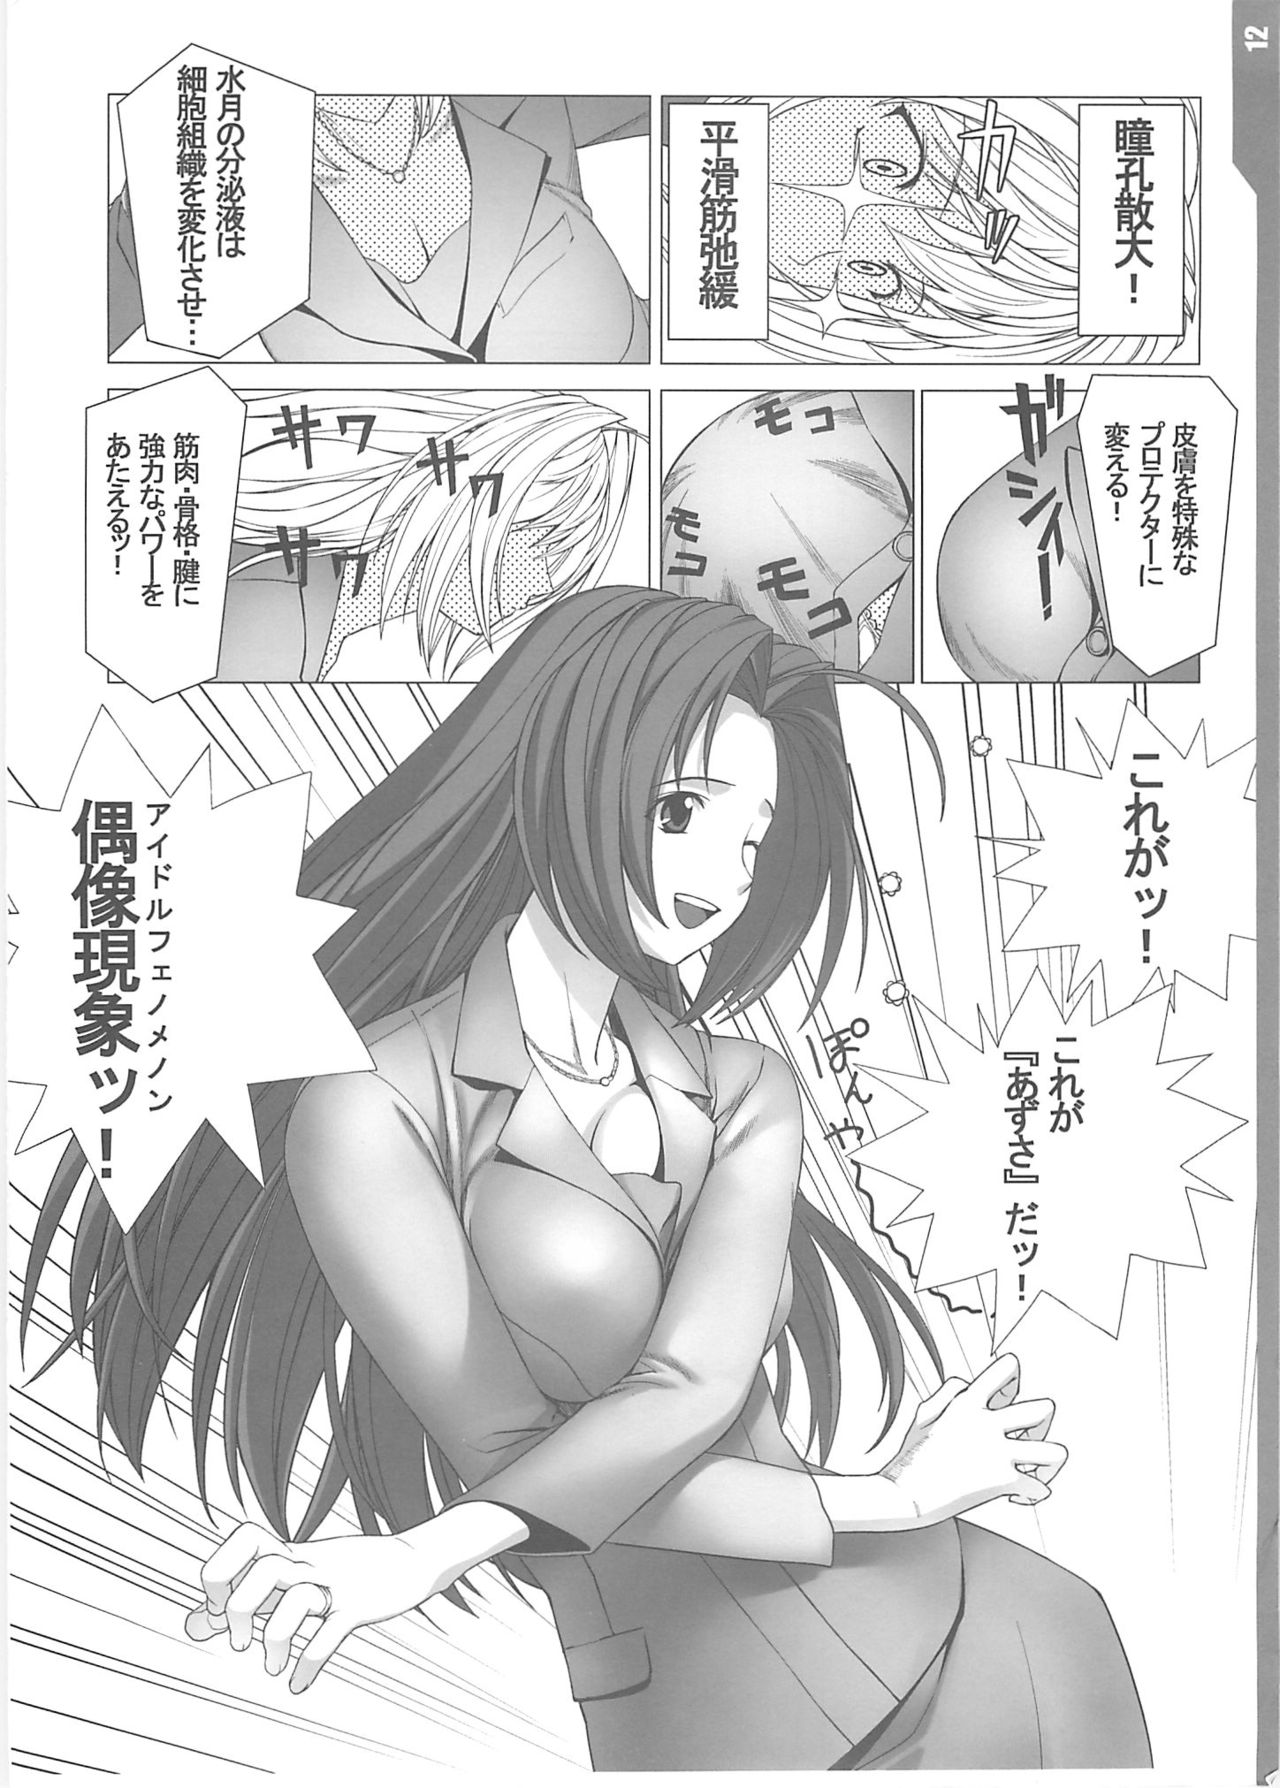 (C71) [Initial G] Enikki Recycle 7 no Omake Hon (THE iDOLM@STER) 